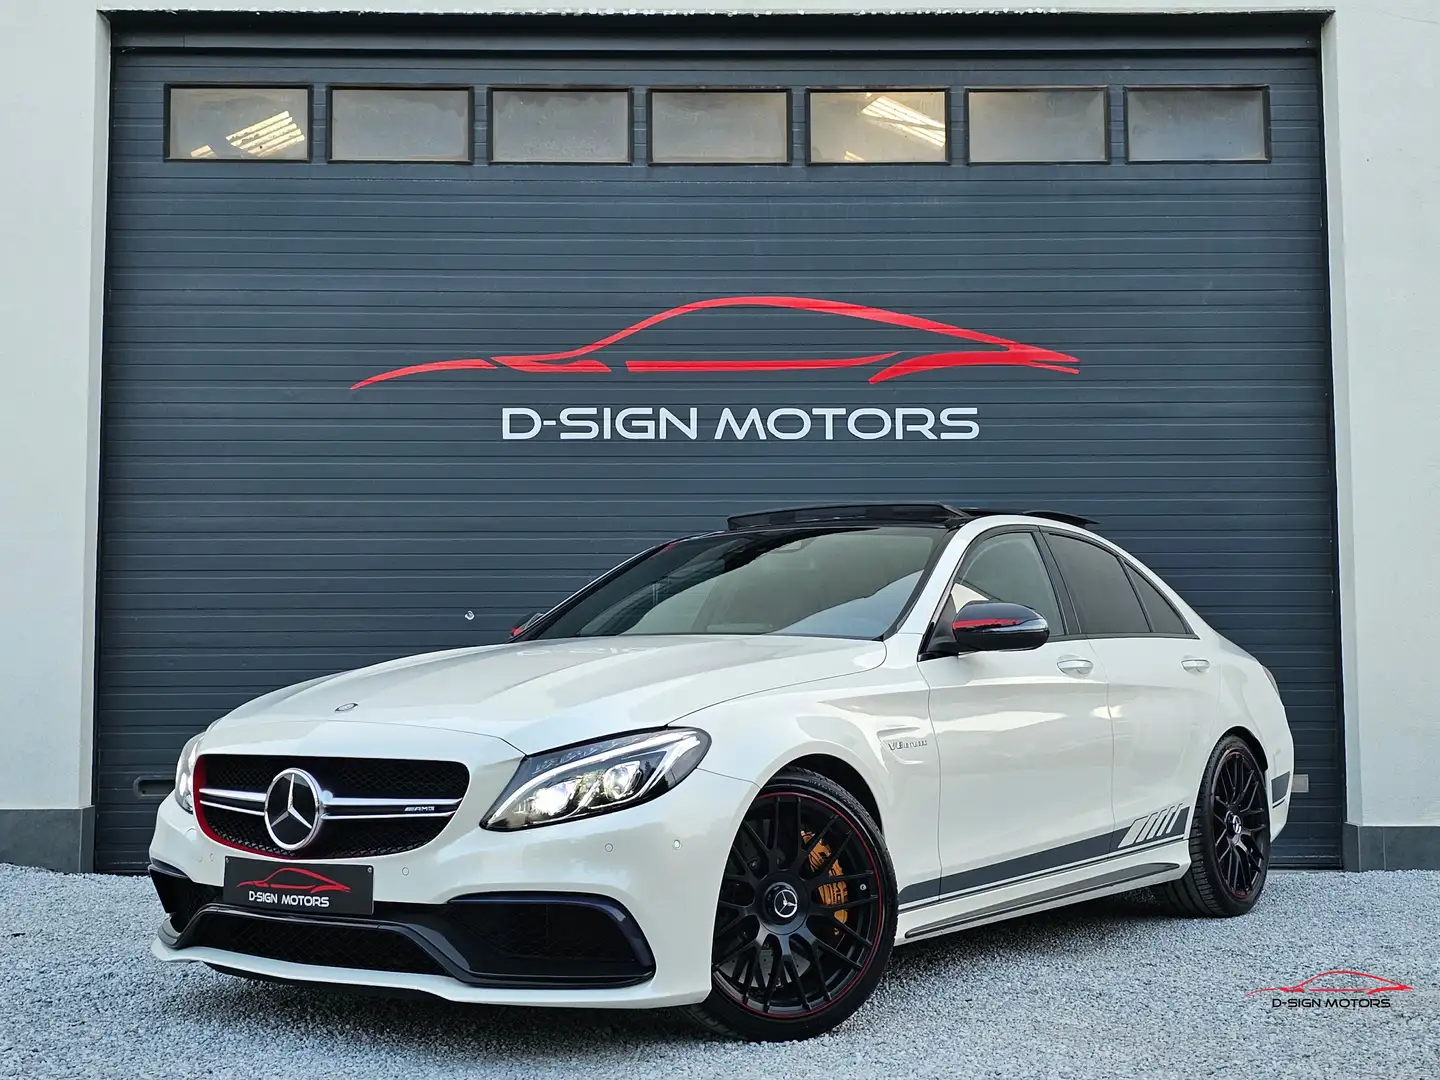 Mercedes-Benz C 63 AMG S V8 (510ch) EDITION 1 2015 70.000km FULL OPTIONS Wit - 1